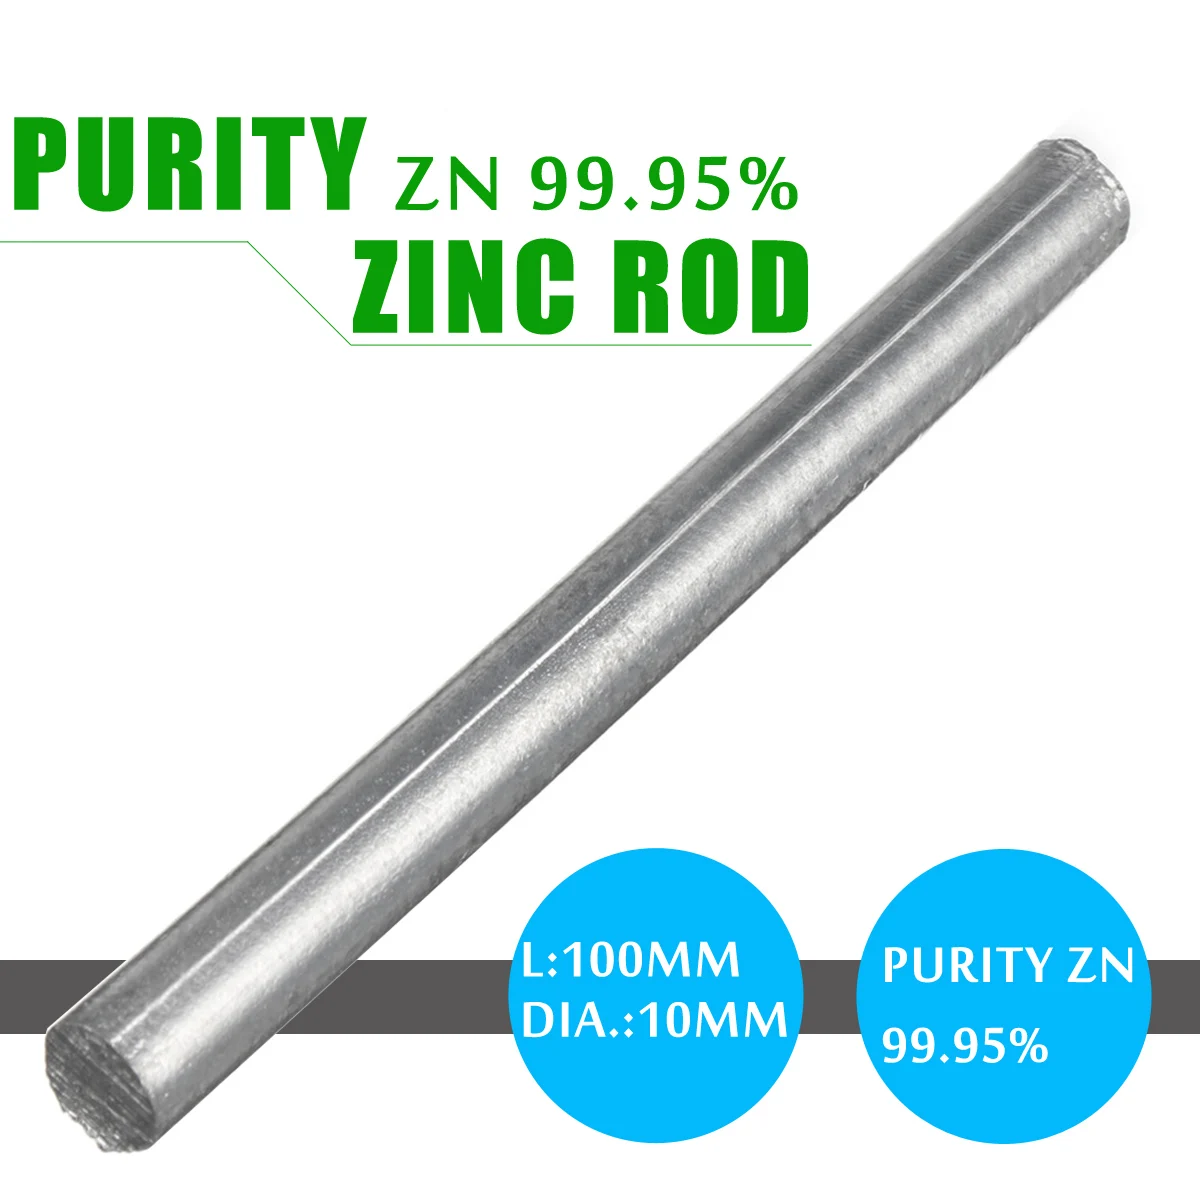 1pc Pure Zn Rods 99.95% High Purity Zinc Solid Round Bar 0.4" 4" Durable Acce… 